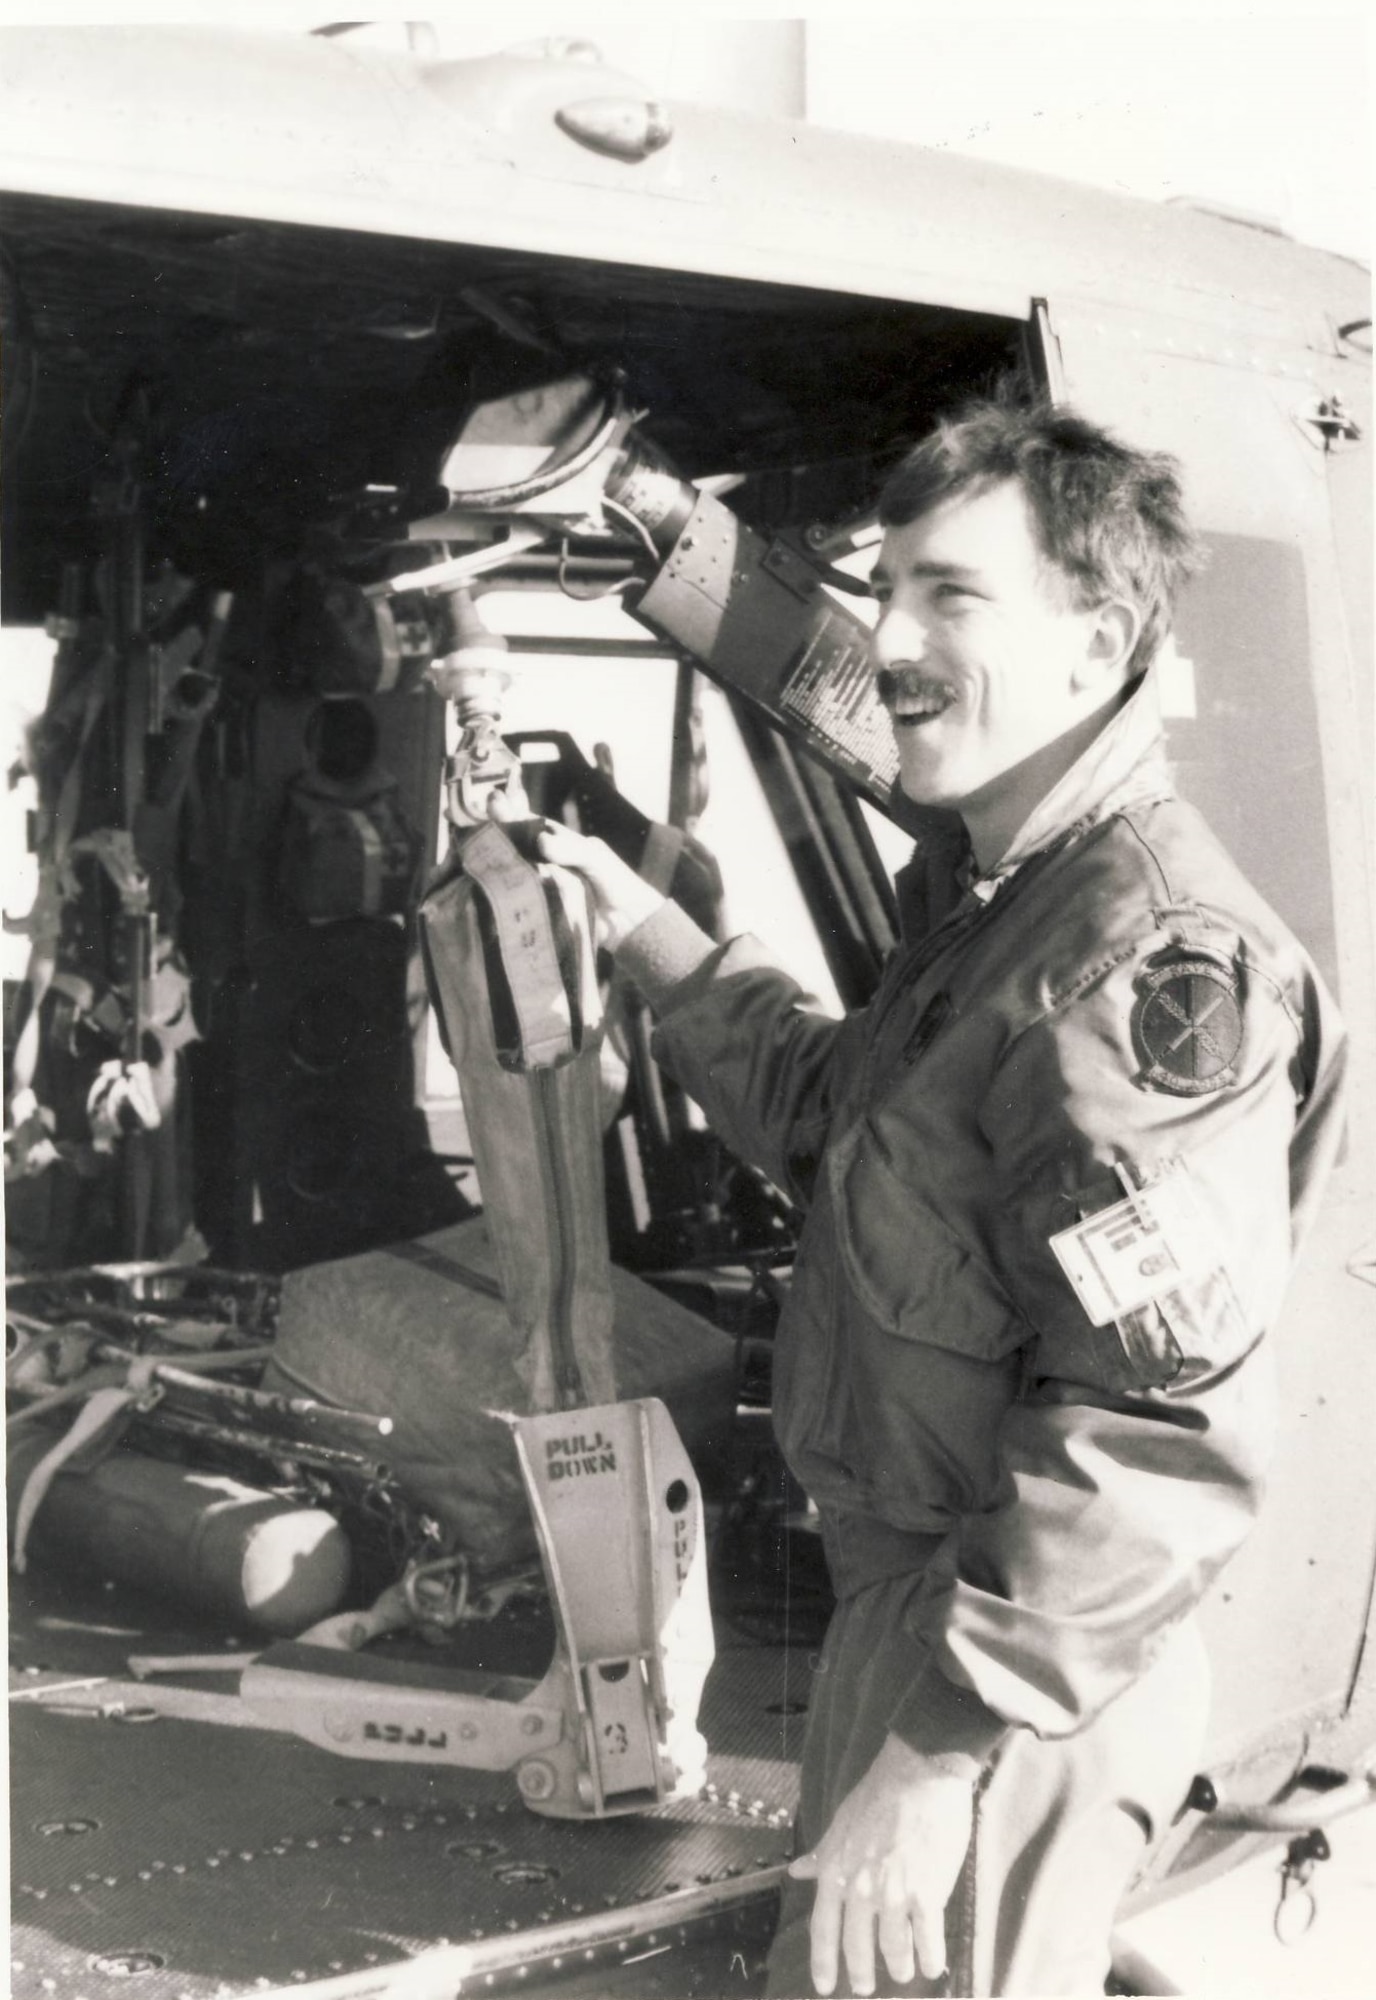 Second Lieutenant Gene Vey, Detachment 4, 40th Aerospace Rescue and Recovery Squadron (ARRS), posing in front of the open door of a rescue and recovery UH-1N helicopter at Hill AFB, Utah, in the late 1970s or early 1980s.